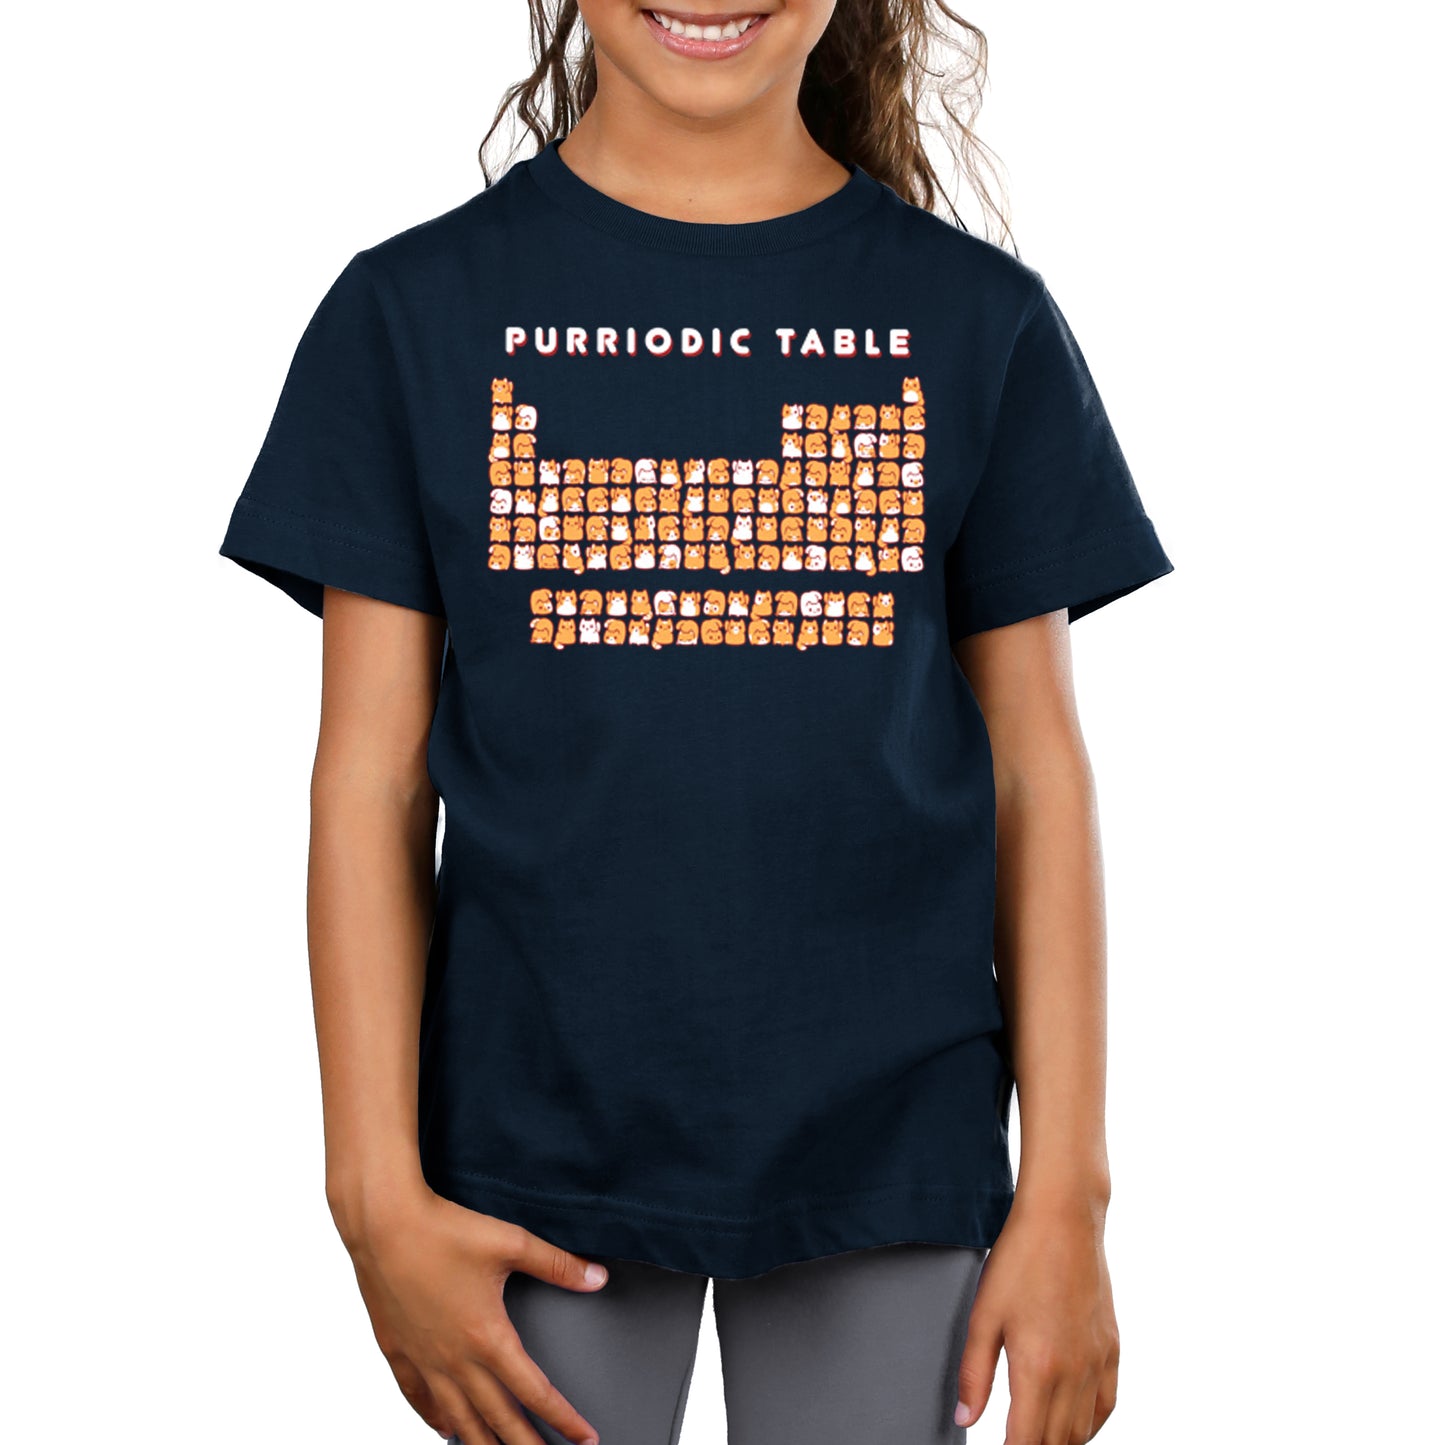 Premium Cotton T-shirt_TeeTurtle Purriodic Table navy blue t-shirt featuring a periodic table chart with elements represented by cats.